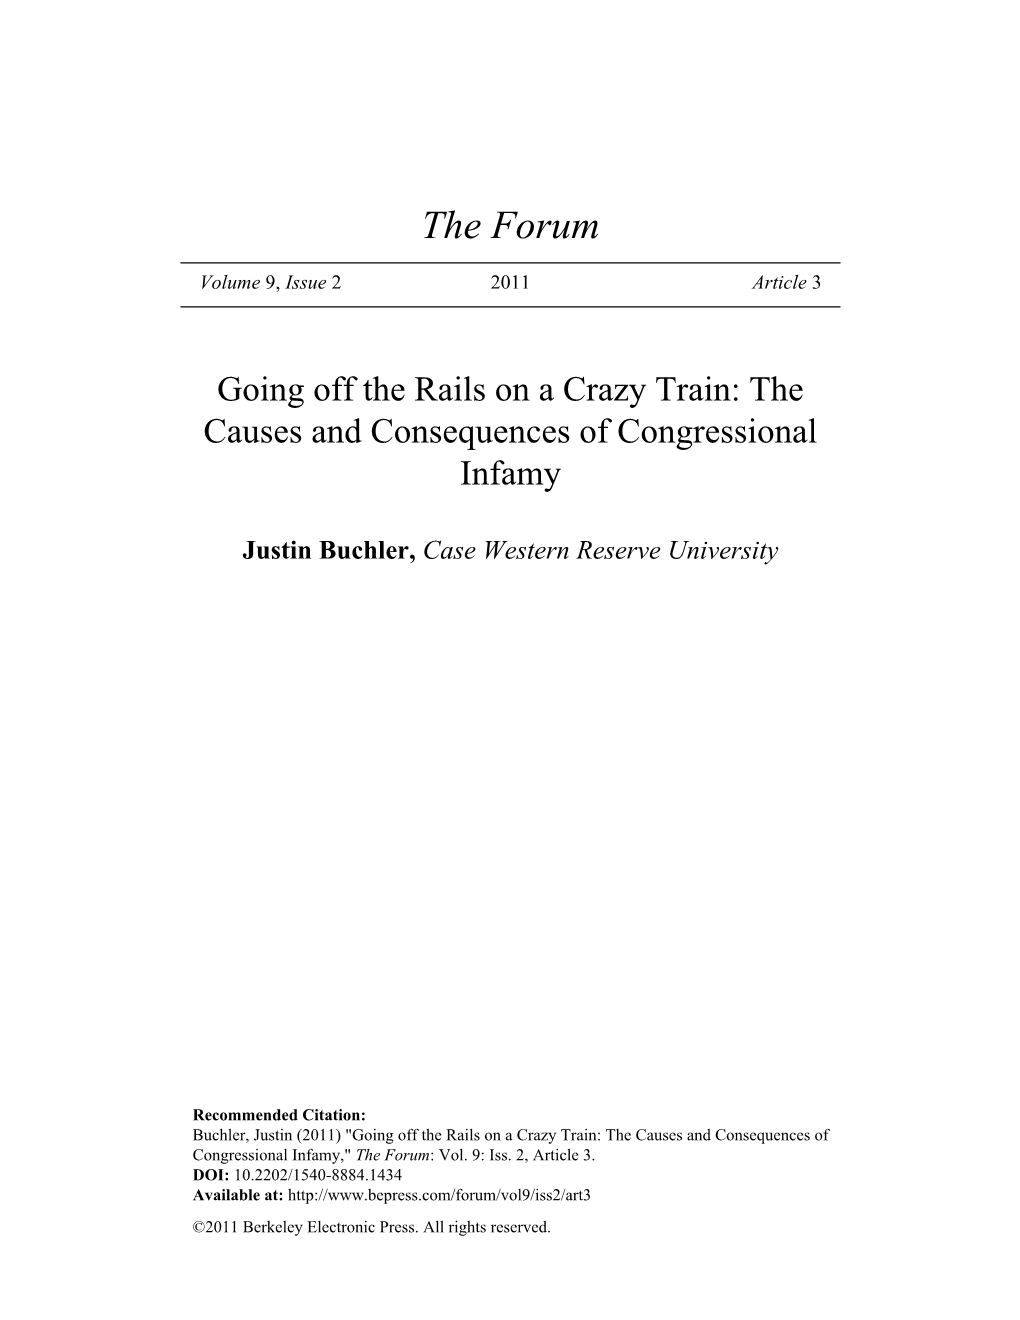 Going Off the Rails on a Crazy Train: the Causes and Consequences of Congressional Infamy